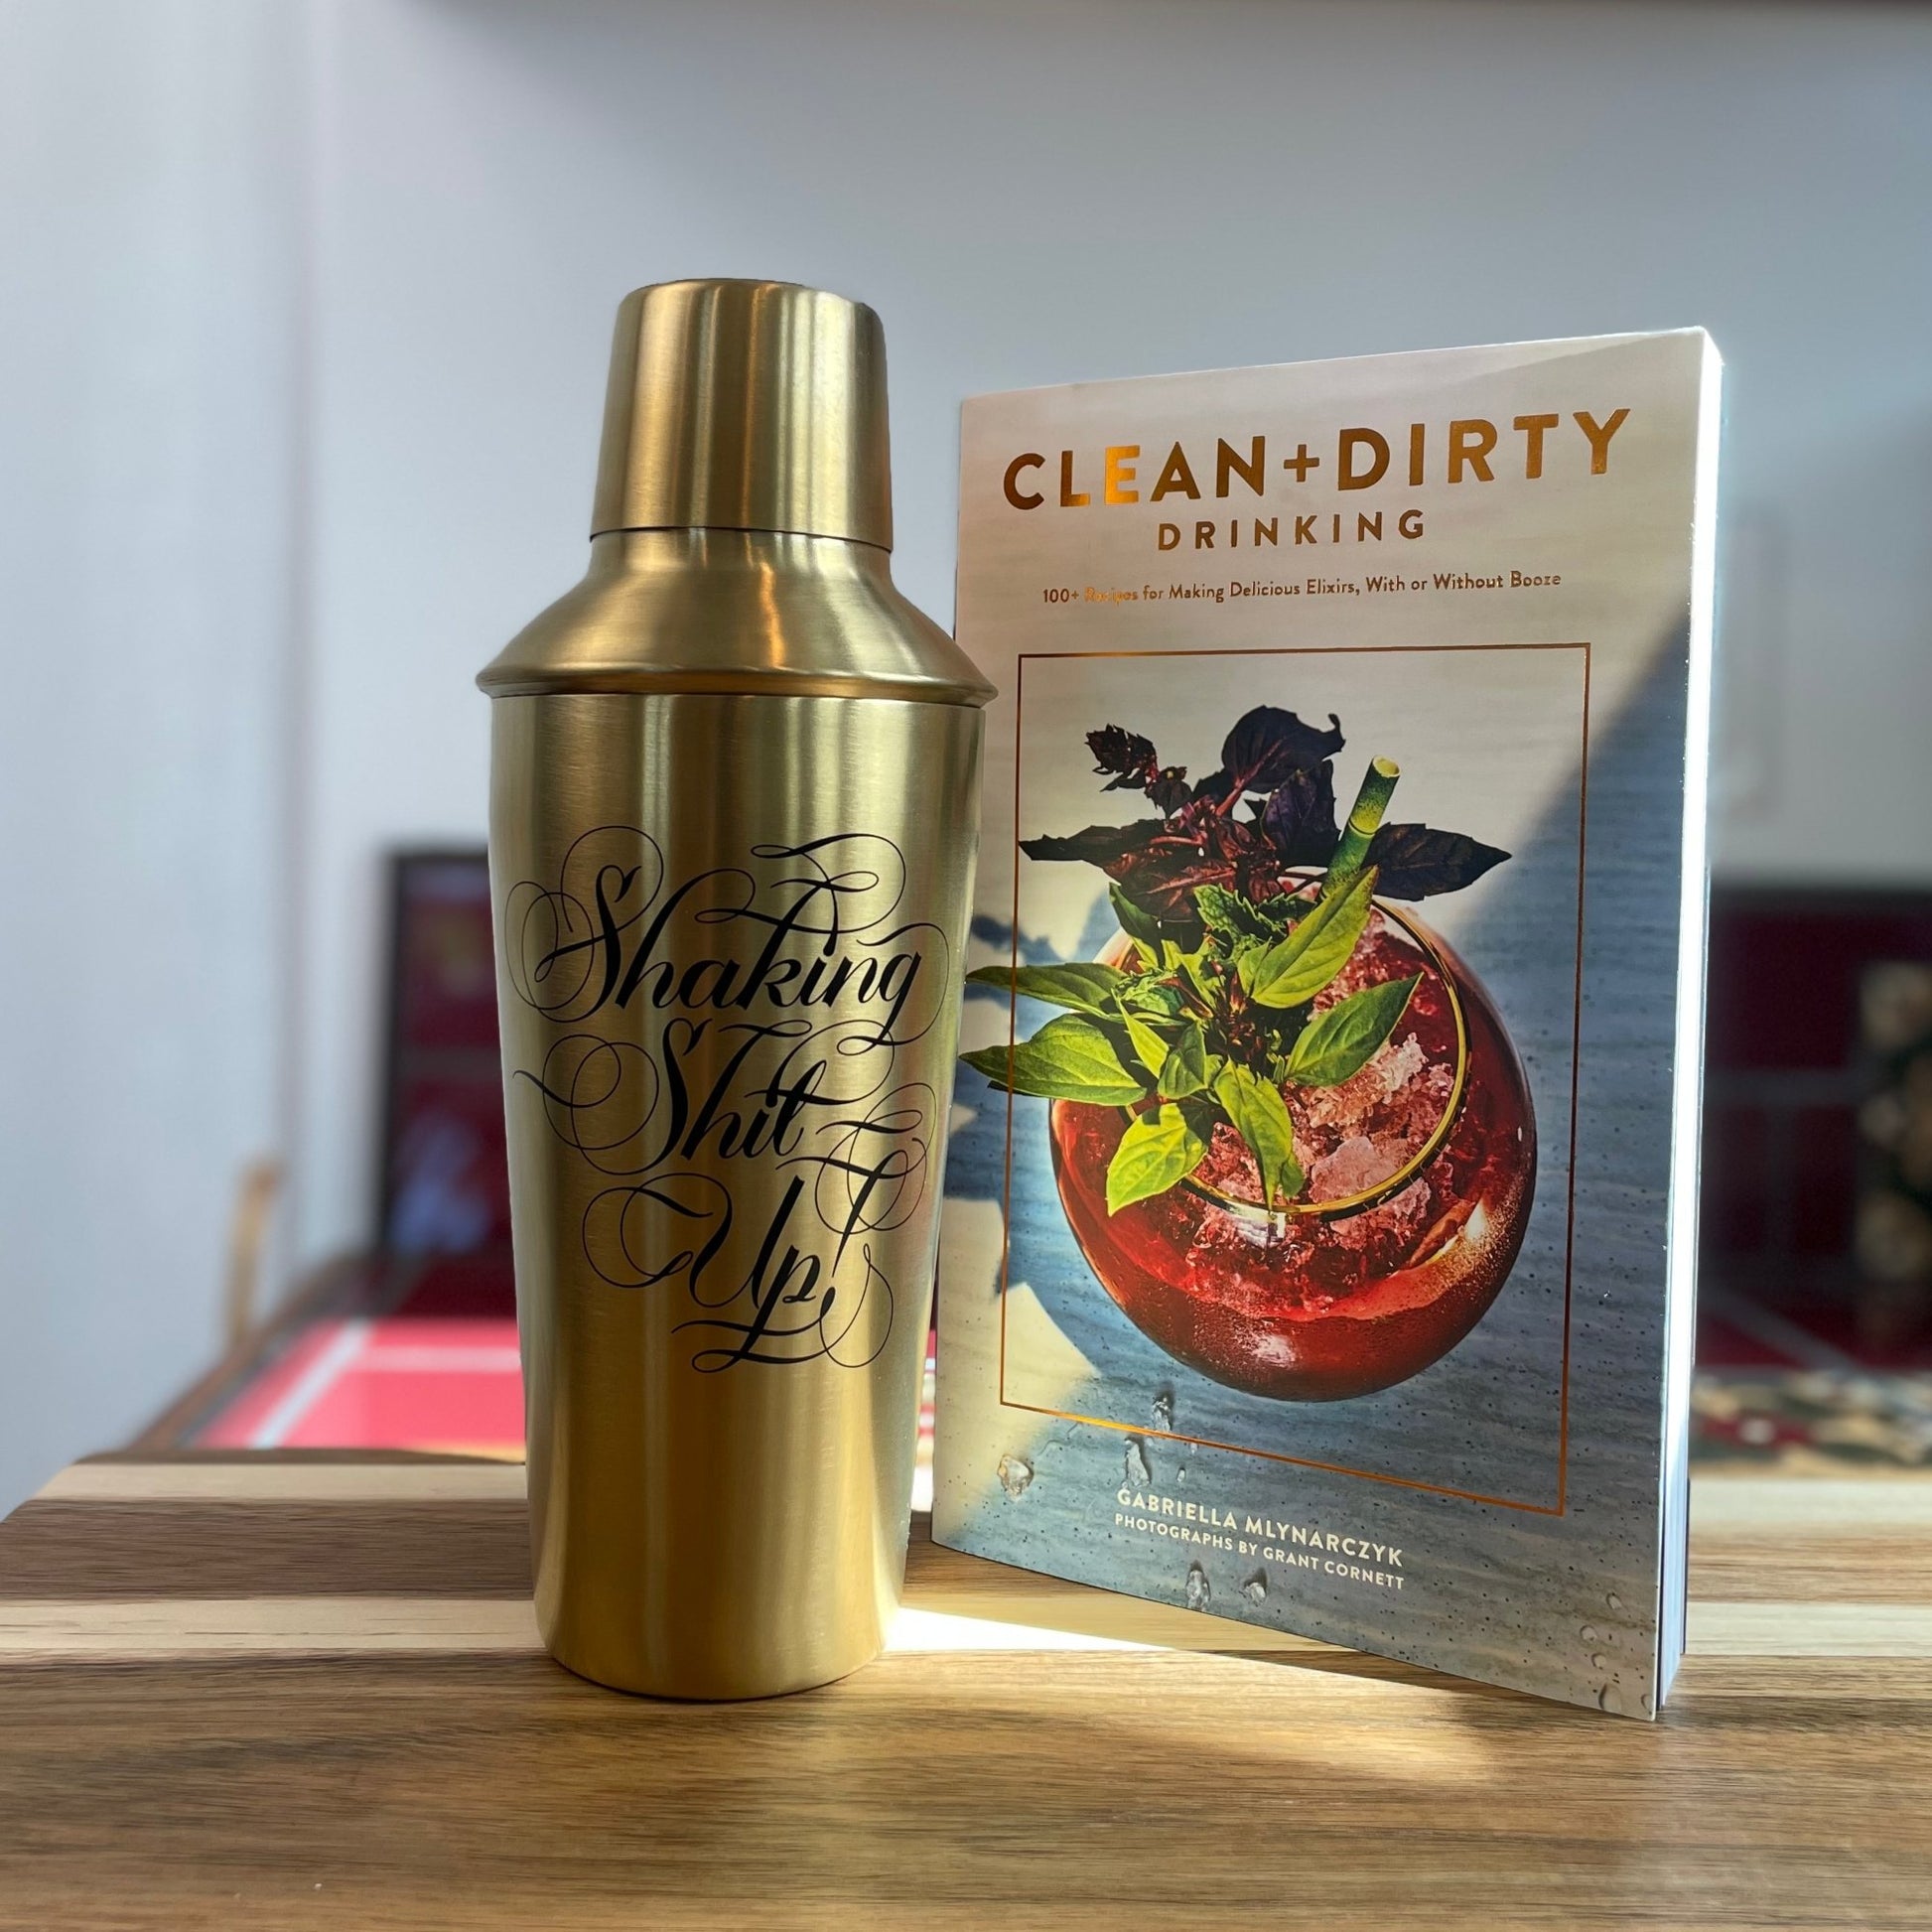 The gold cocktail shaker next to the recipe book on a kitchen counter